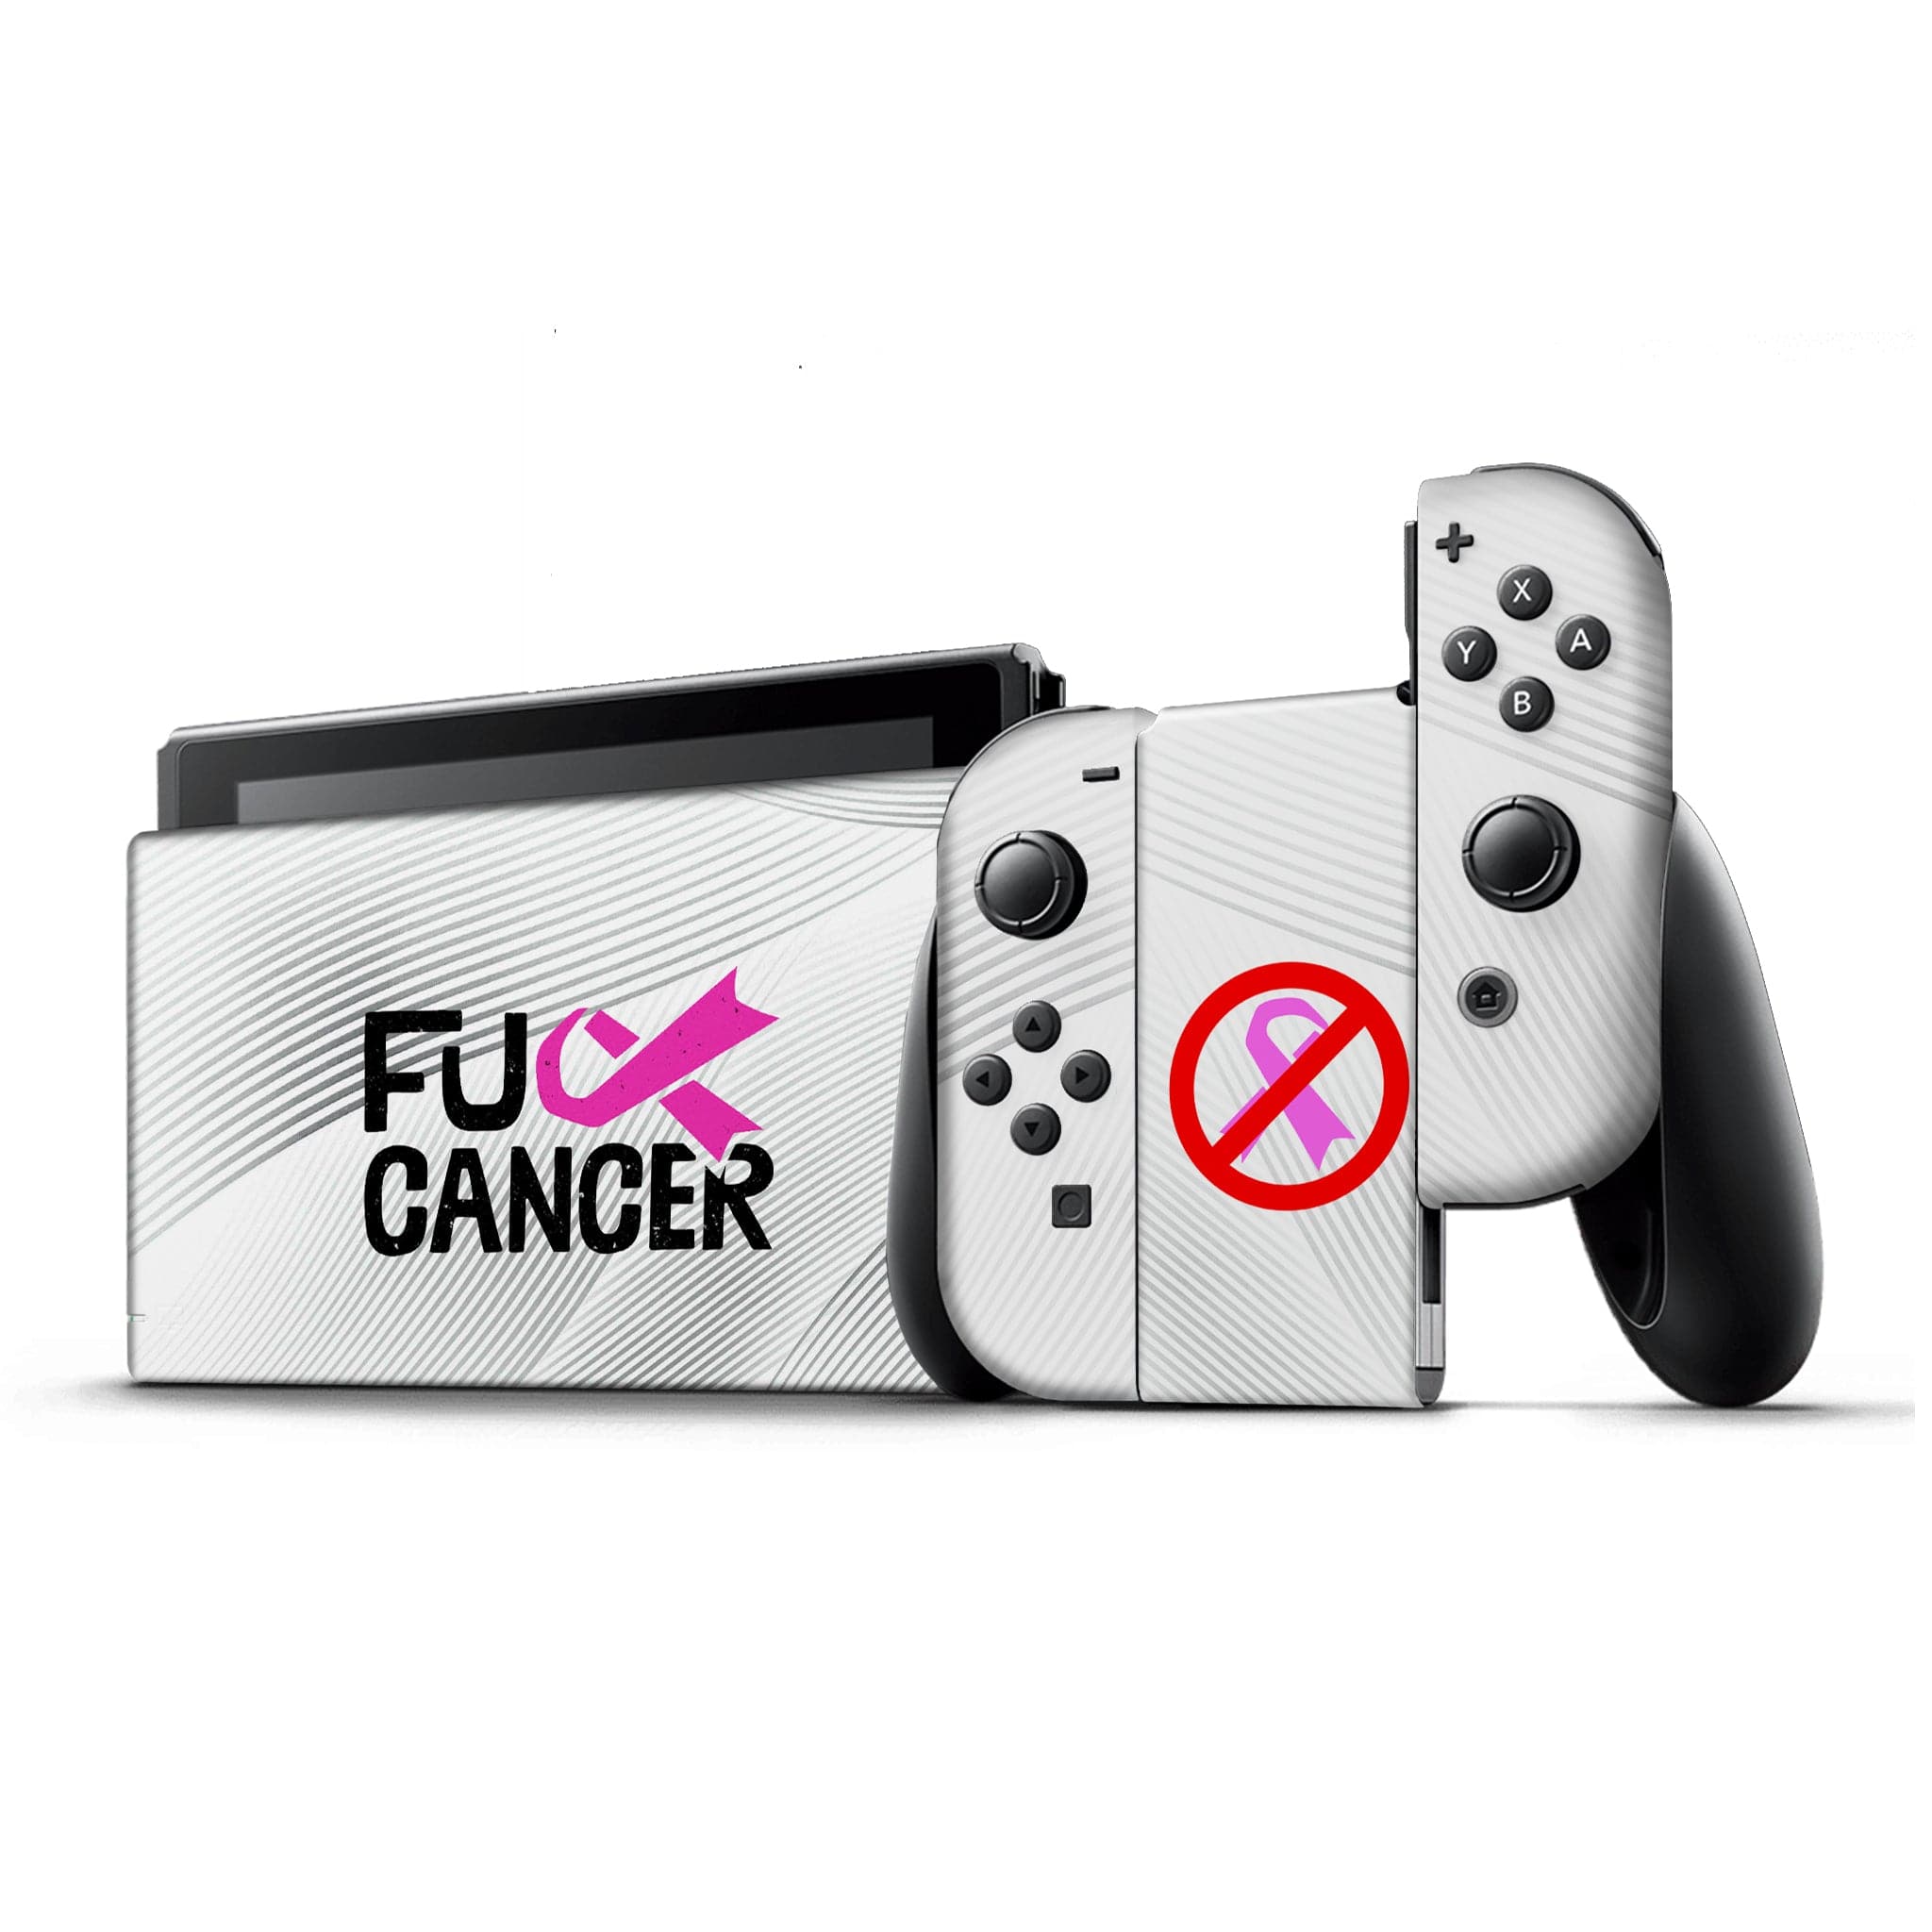 No to Breast Cancer Nintendo Switch Full Set by Nintendo